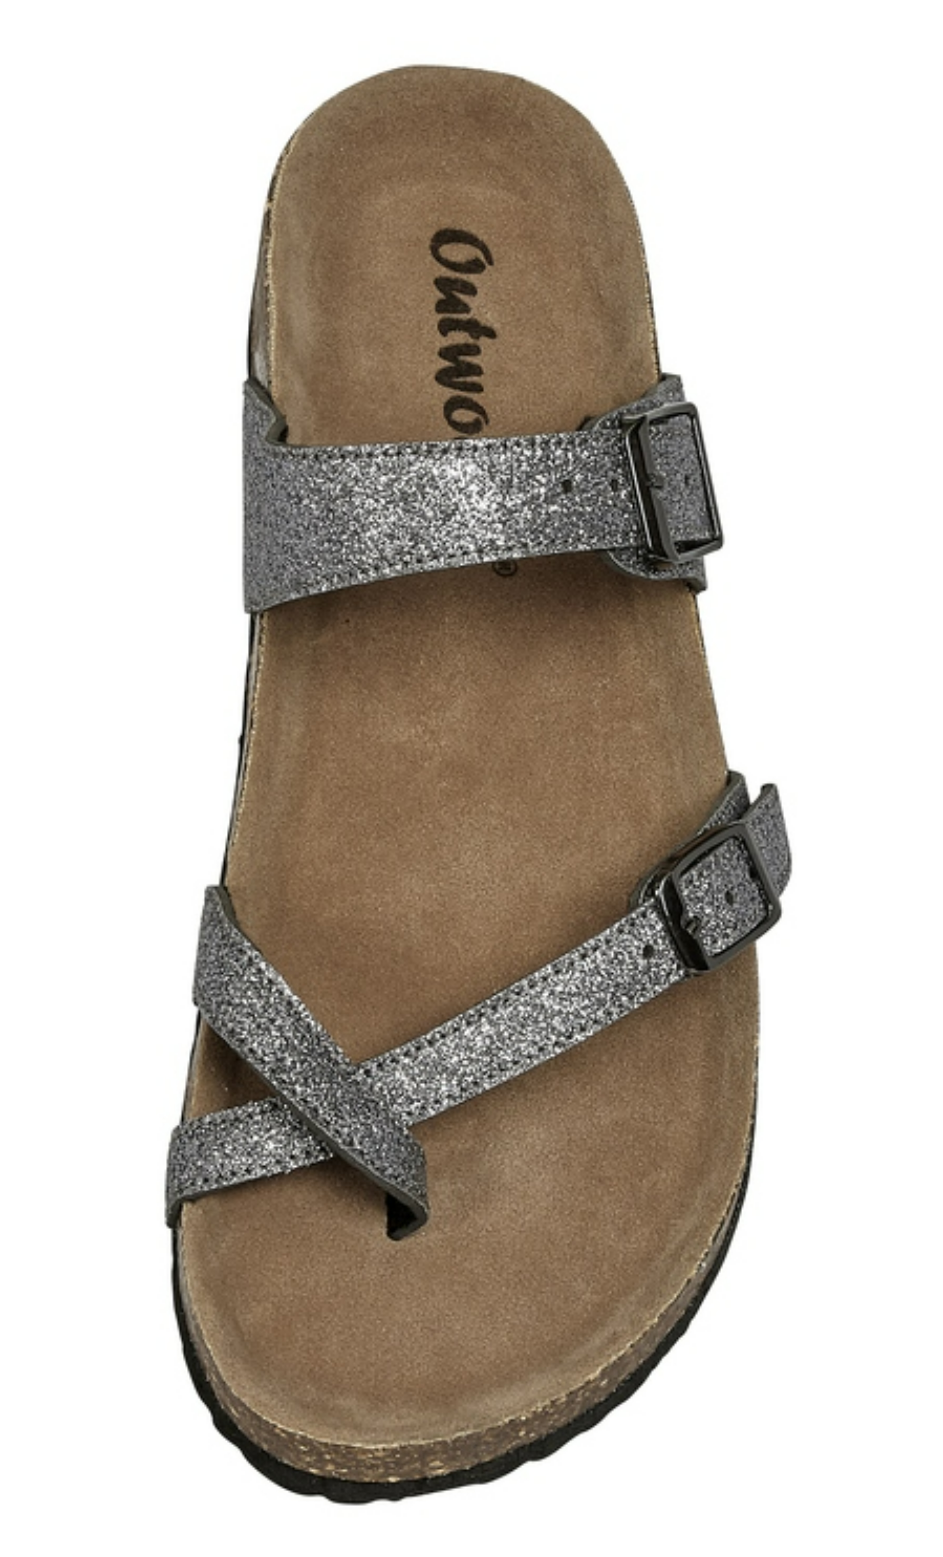 Outwood Bork Slip-on Sandal with Toe Strap in Pewter- Final Sale    Shoes Olem Shoe Corp- Tilden Co.